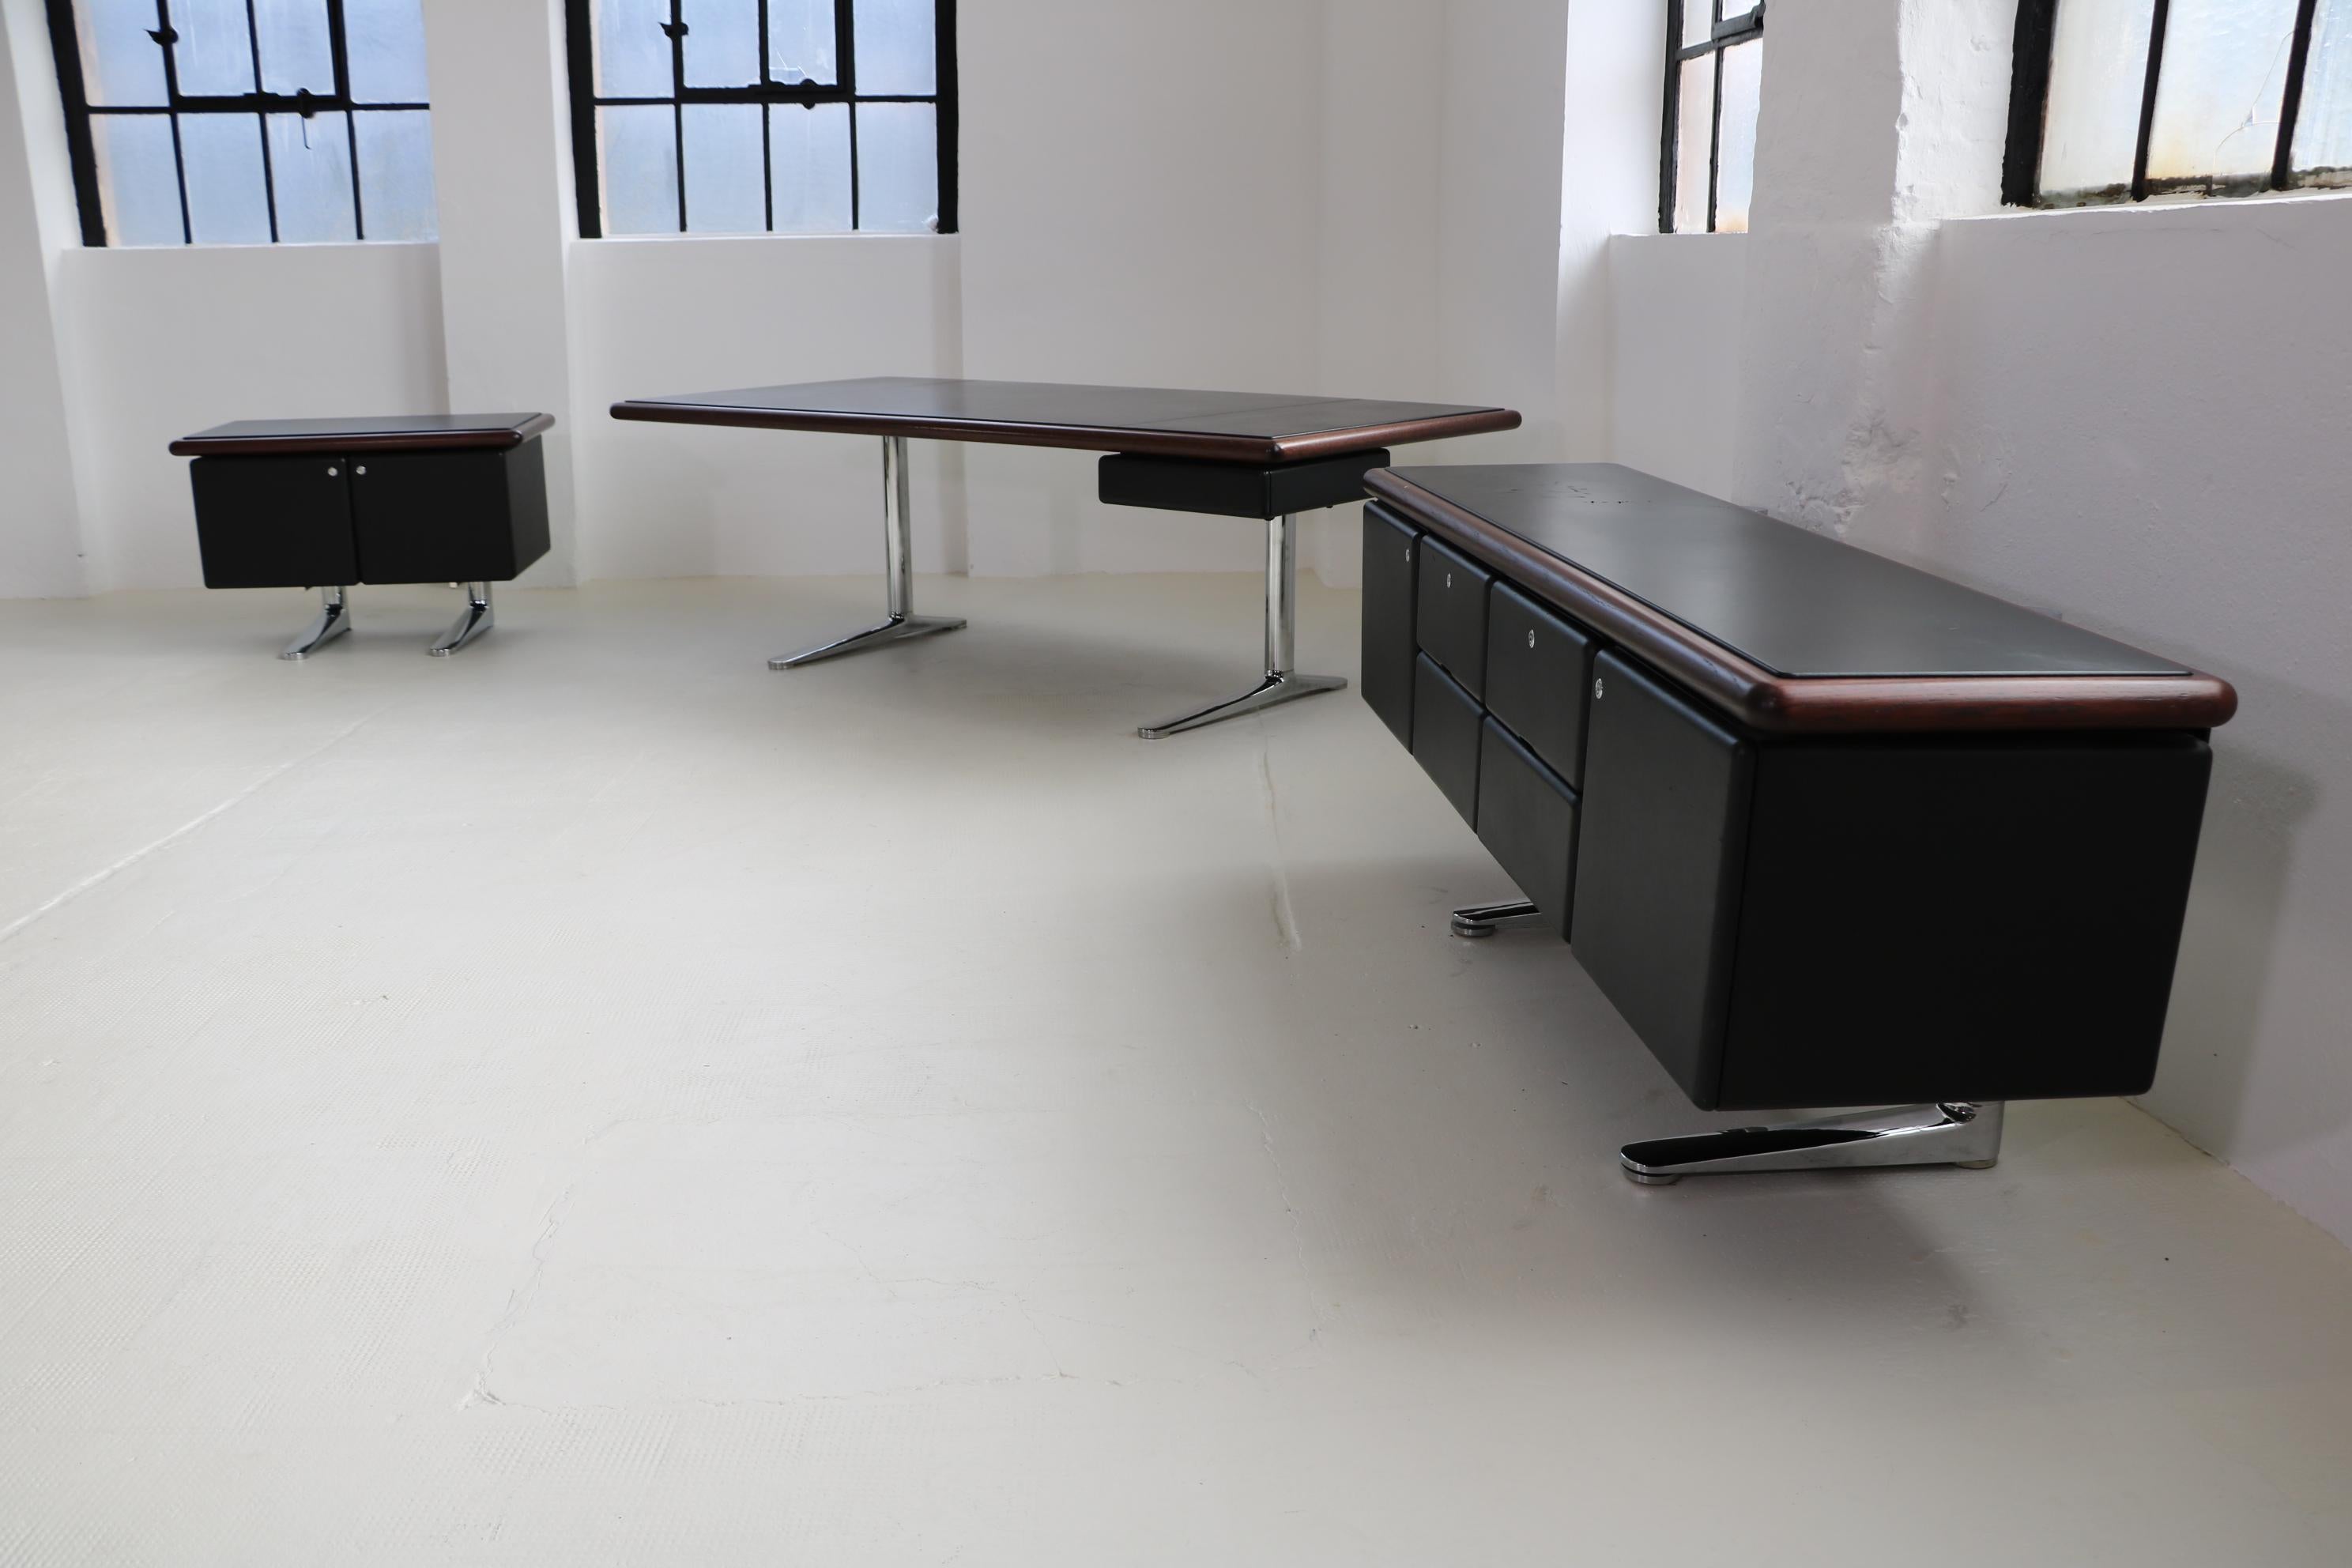 Knoll International complete office by Warren Platner desk + sideboards

Desk: frame steel columns with special cast iron foot brackets chrome-plated, table top covered with black leather/edge solid oak, dark stained.
Dark stained, 1 x pull-out,